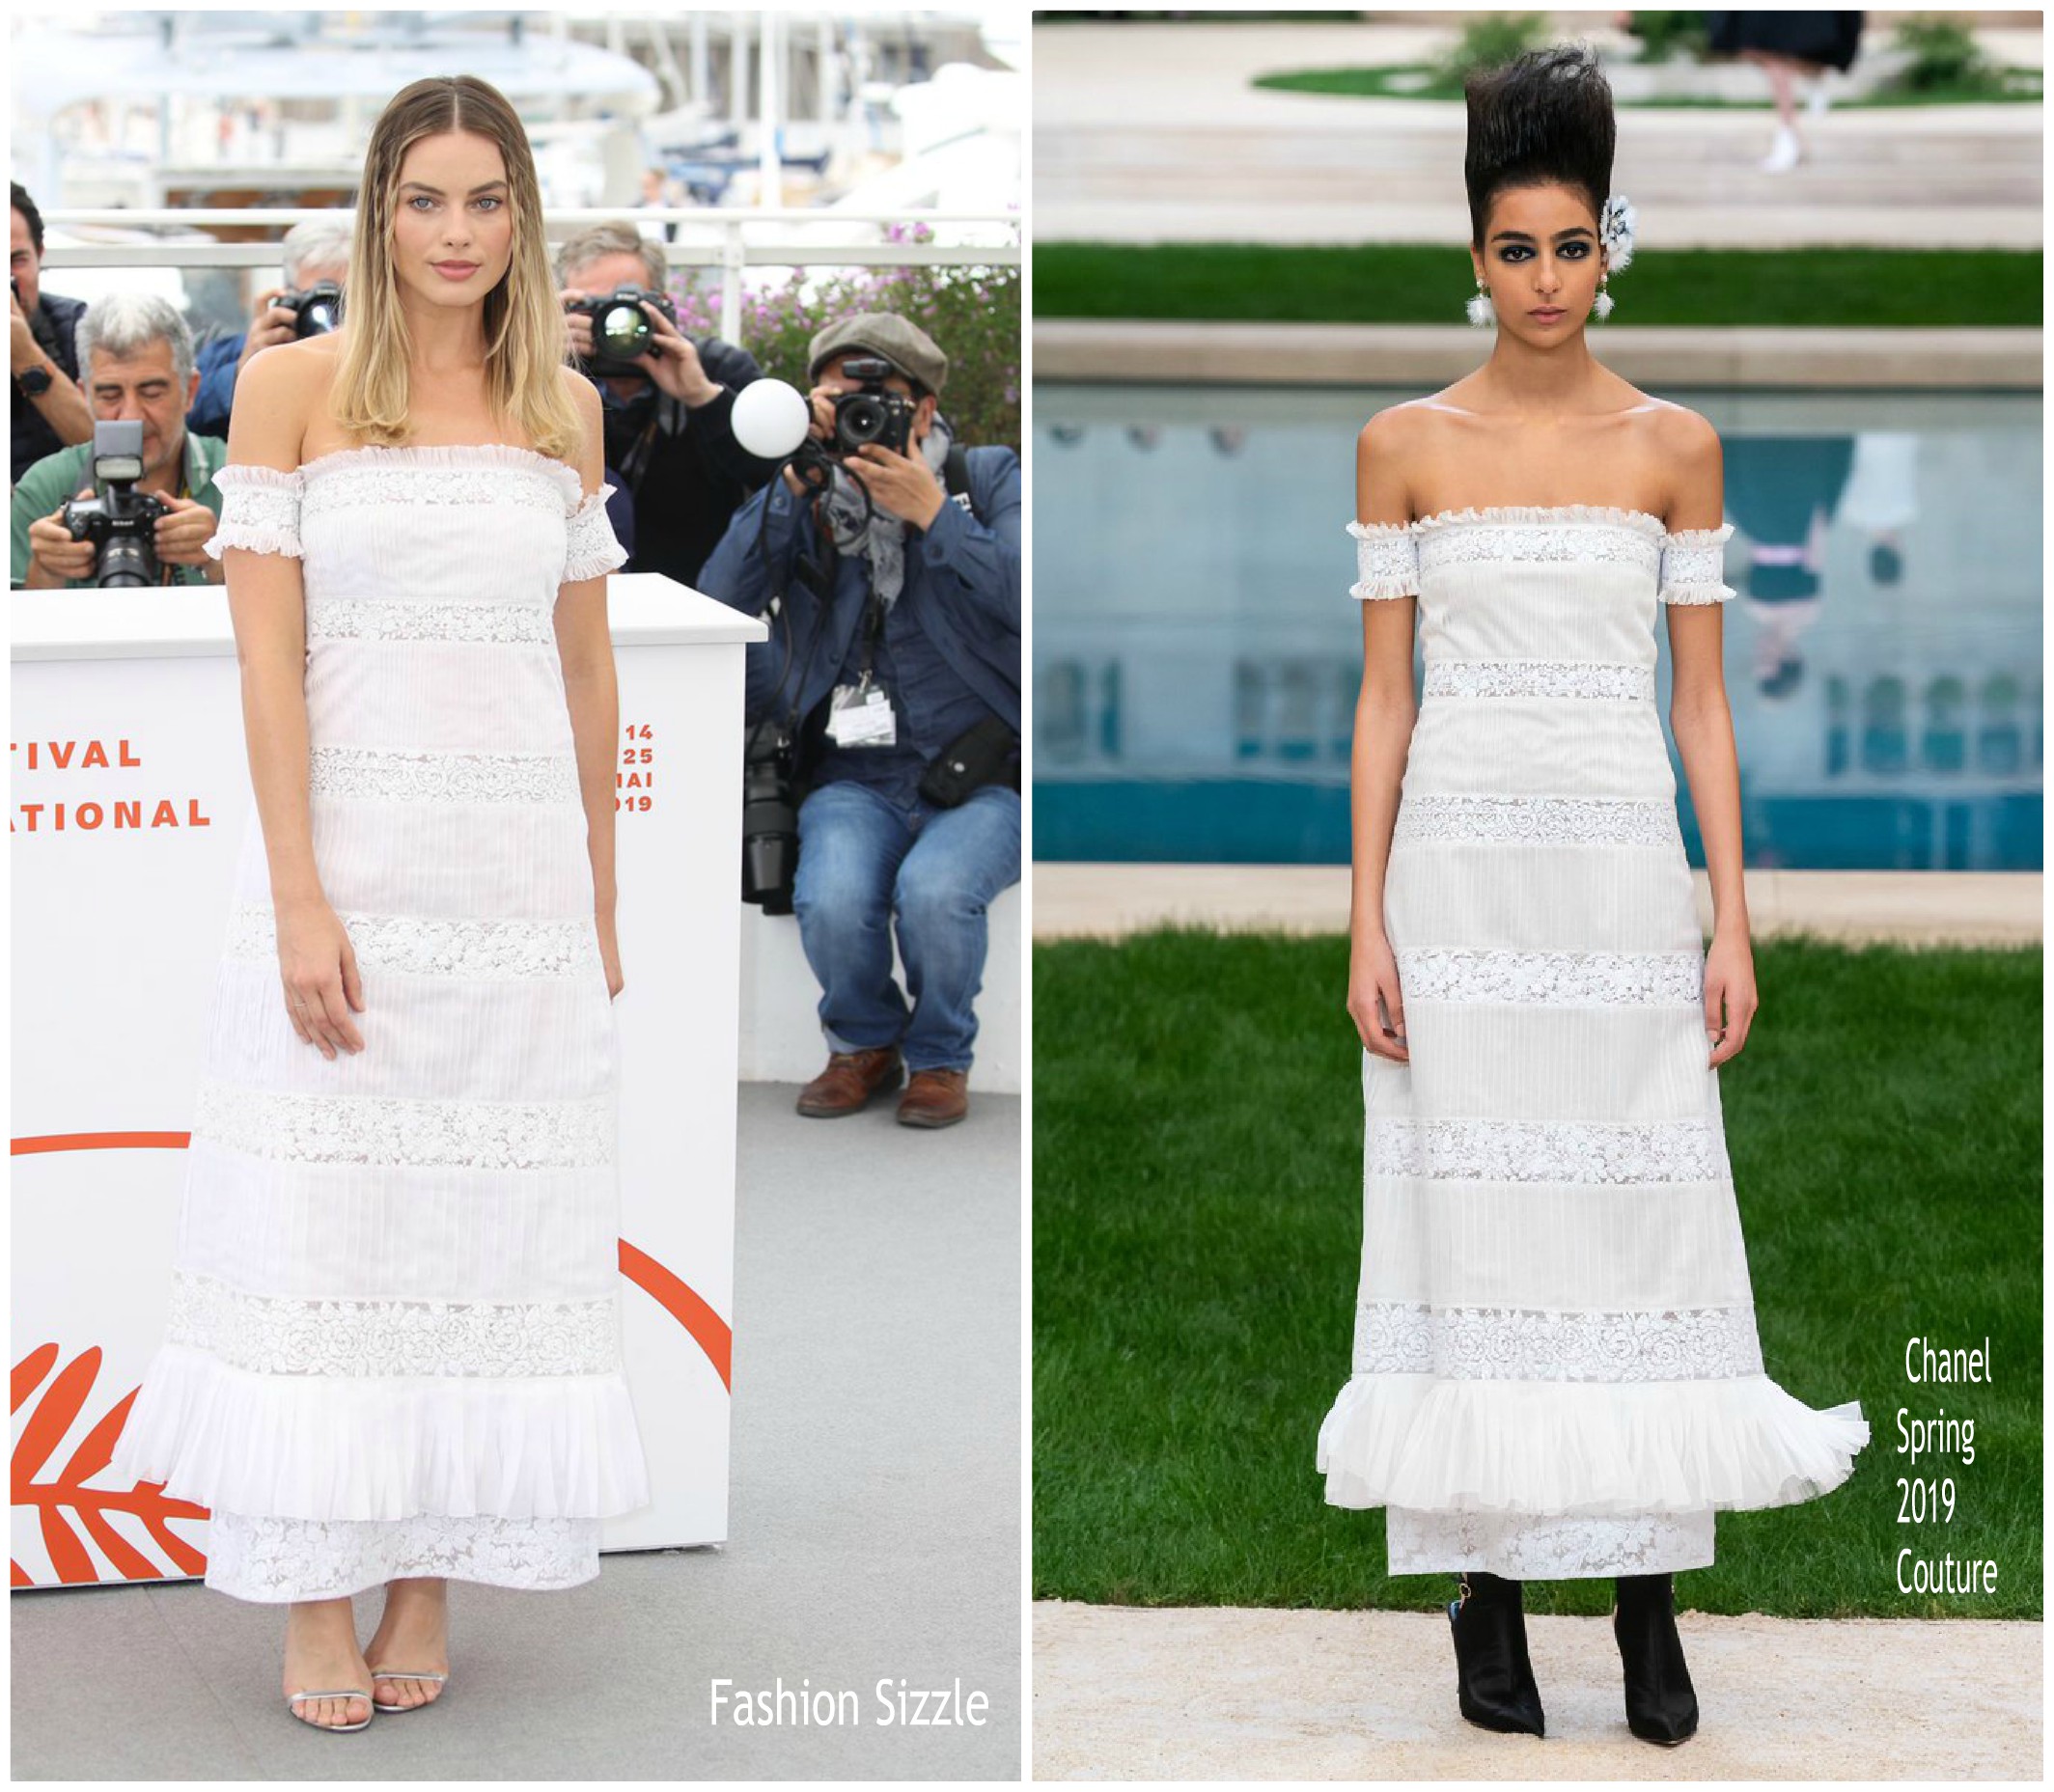 margot-robbie-in-chanel-haute-couture-once-upon-a-time-in-hollywood-cannes-photocall